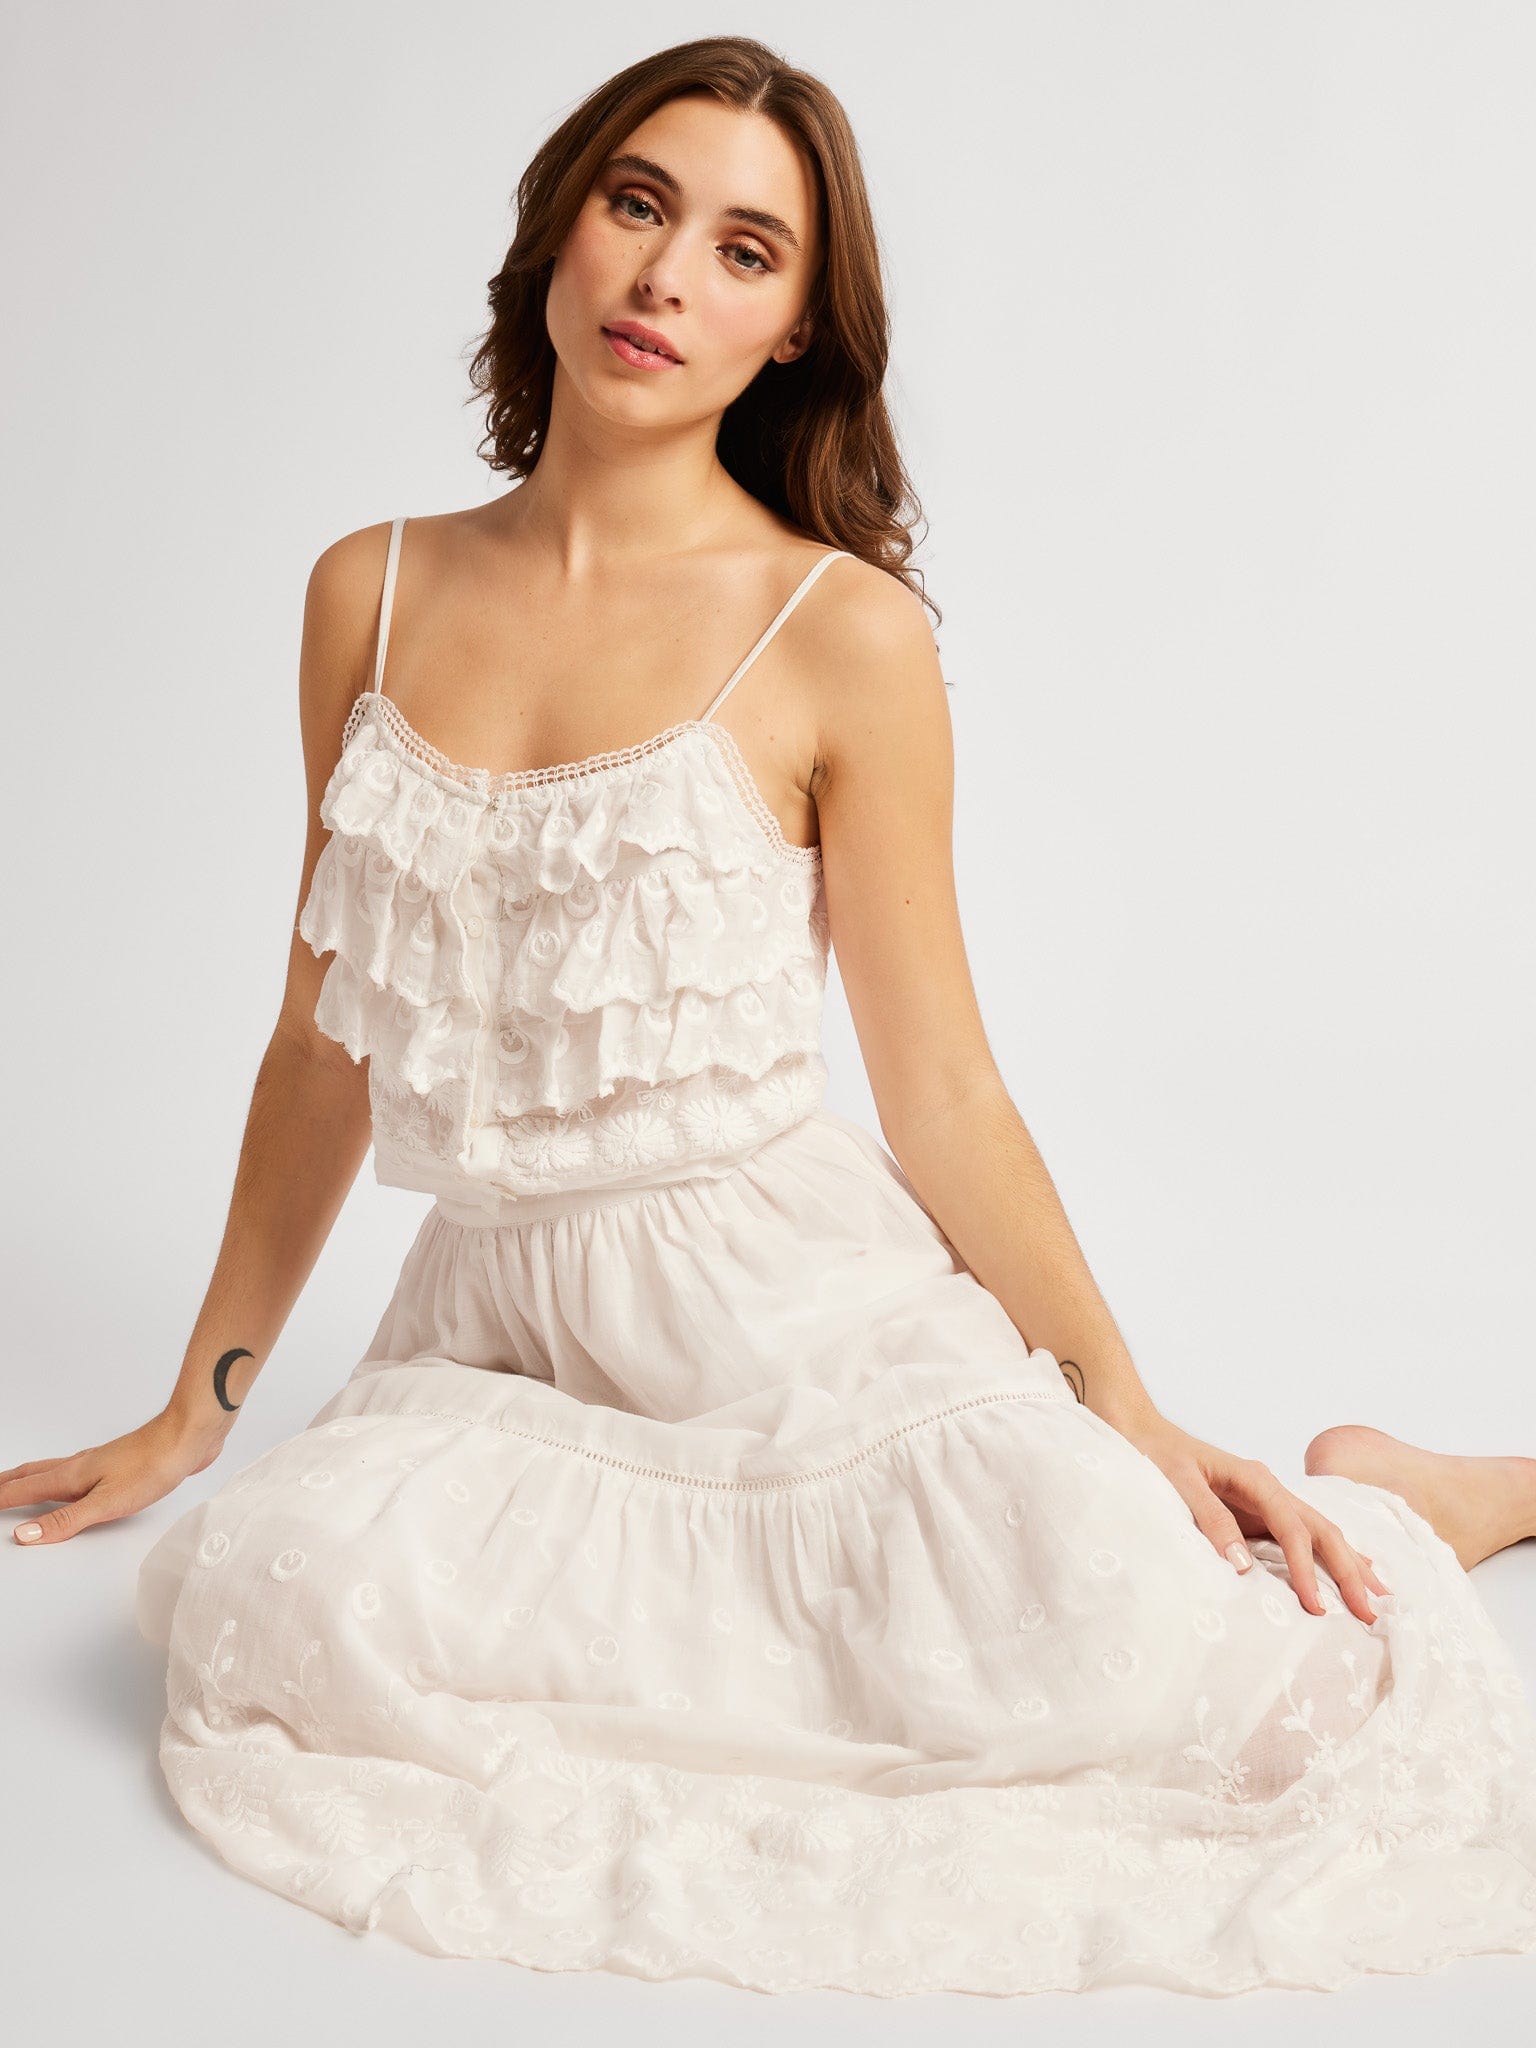 MILLE Clothing Betty Skirt in White Petal Embroidery